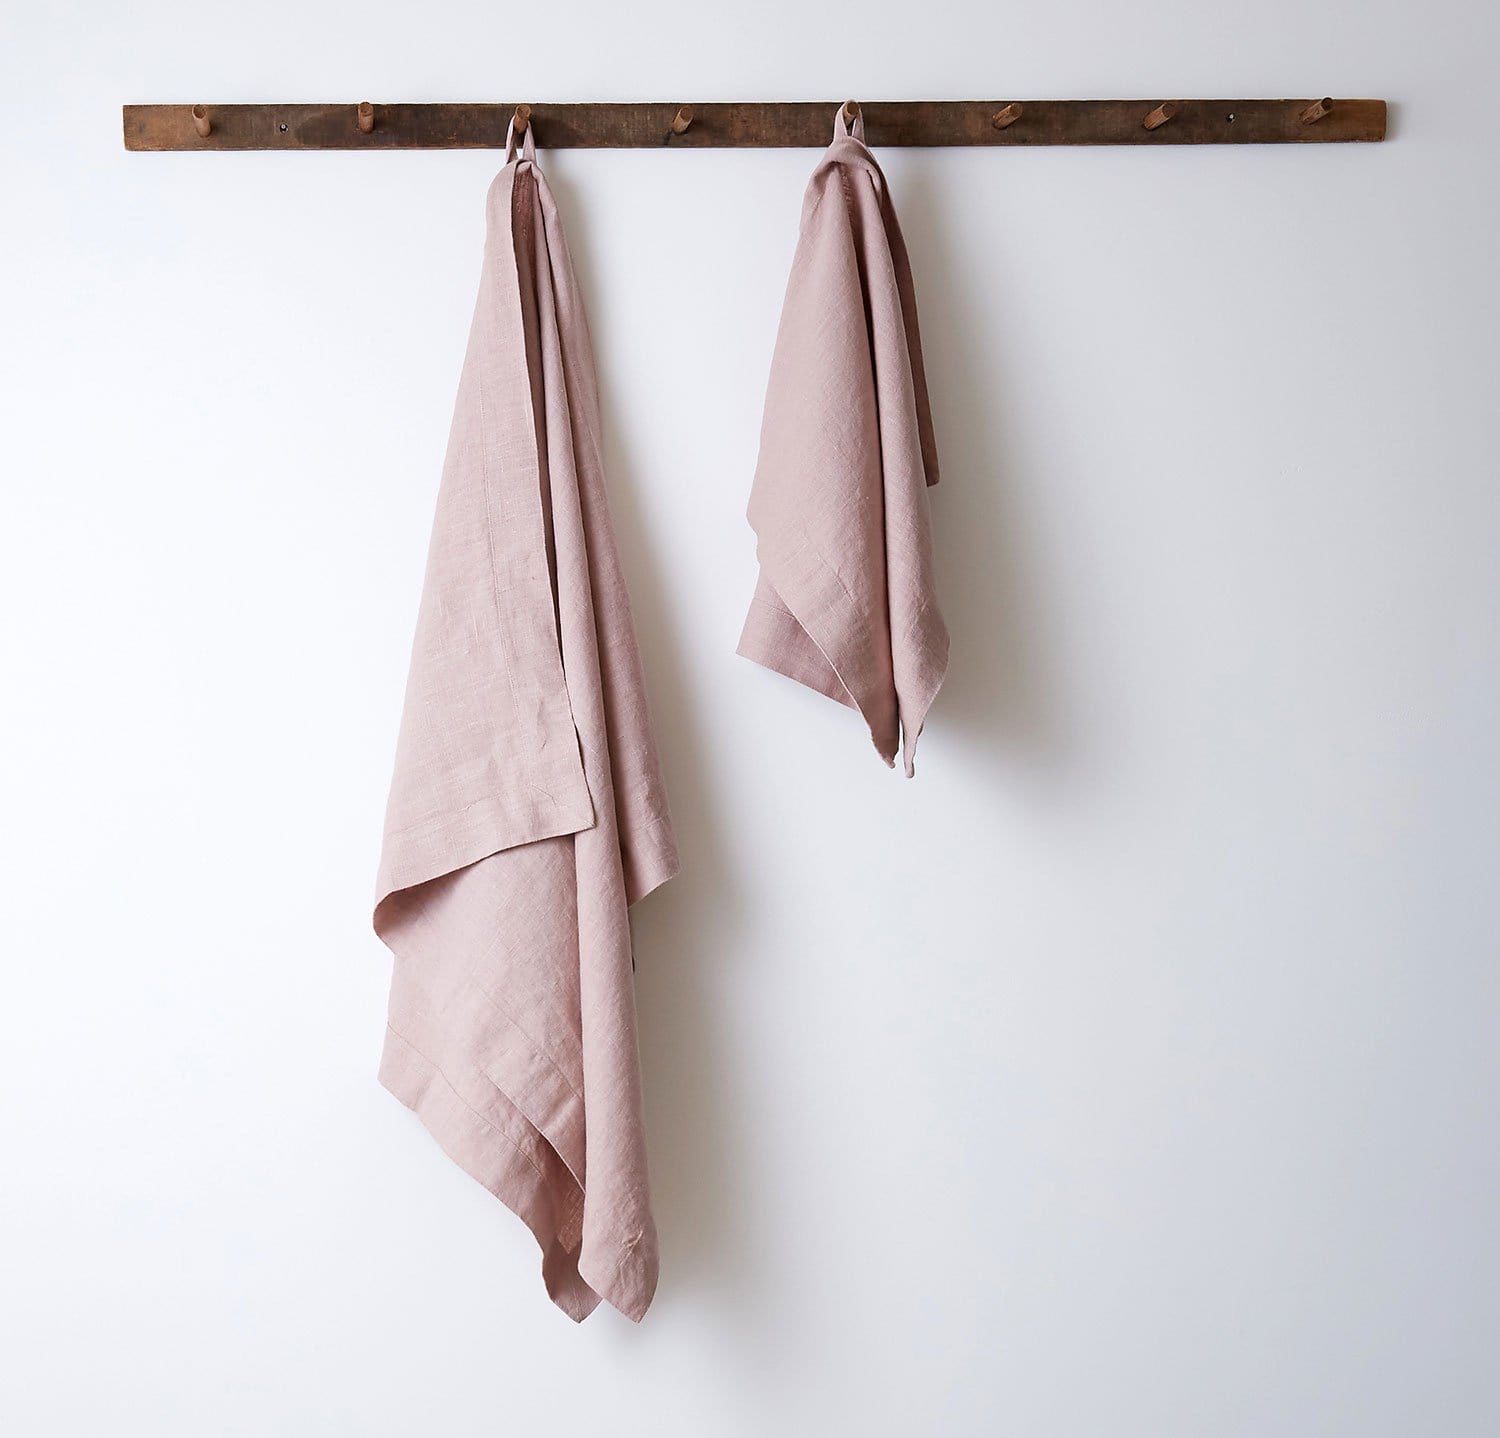 hanging 100% linen bath towel sturdy antimicrobial fast drying heavyweight Orkney linen fabric rose light pink color